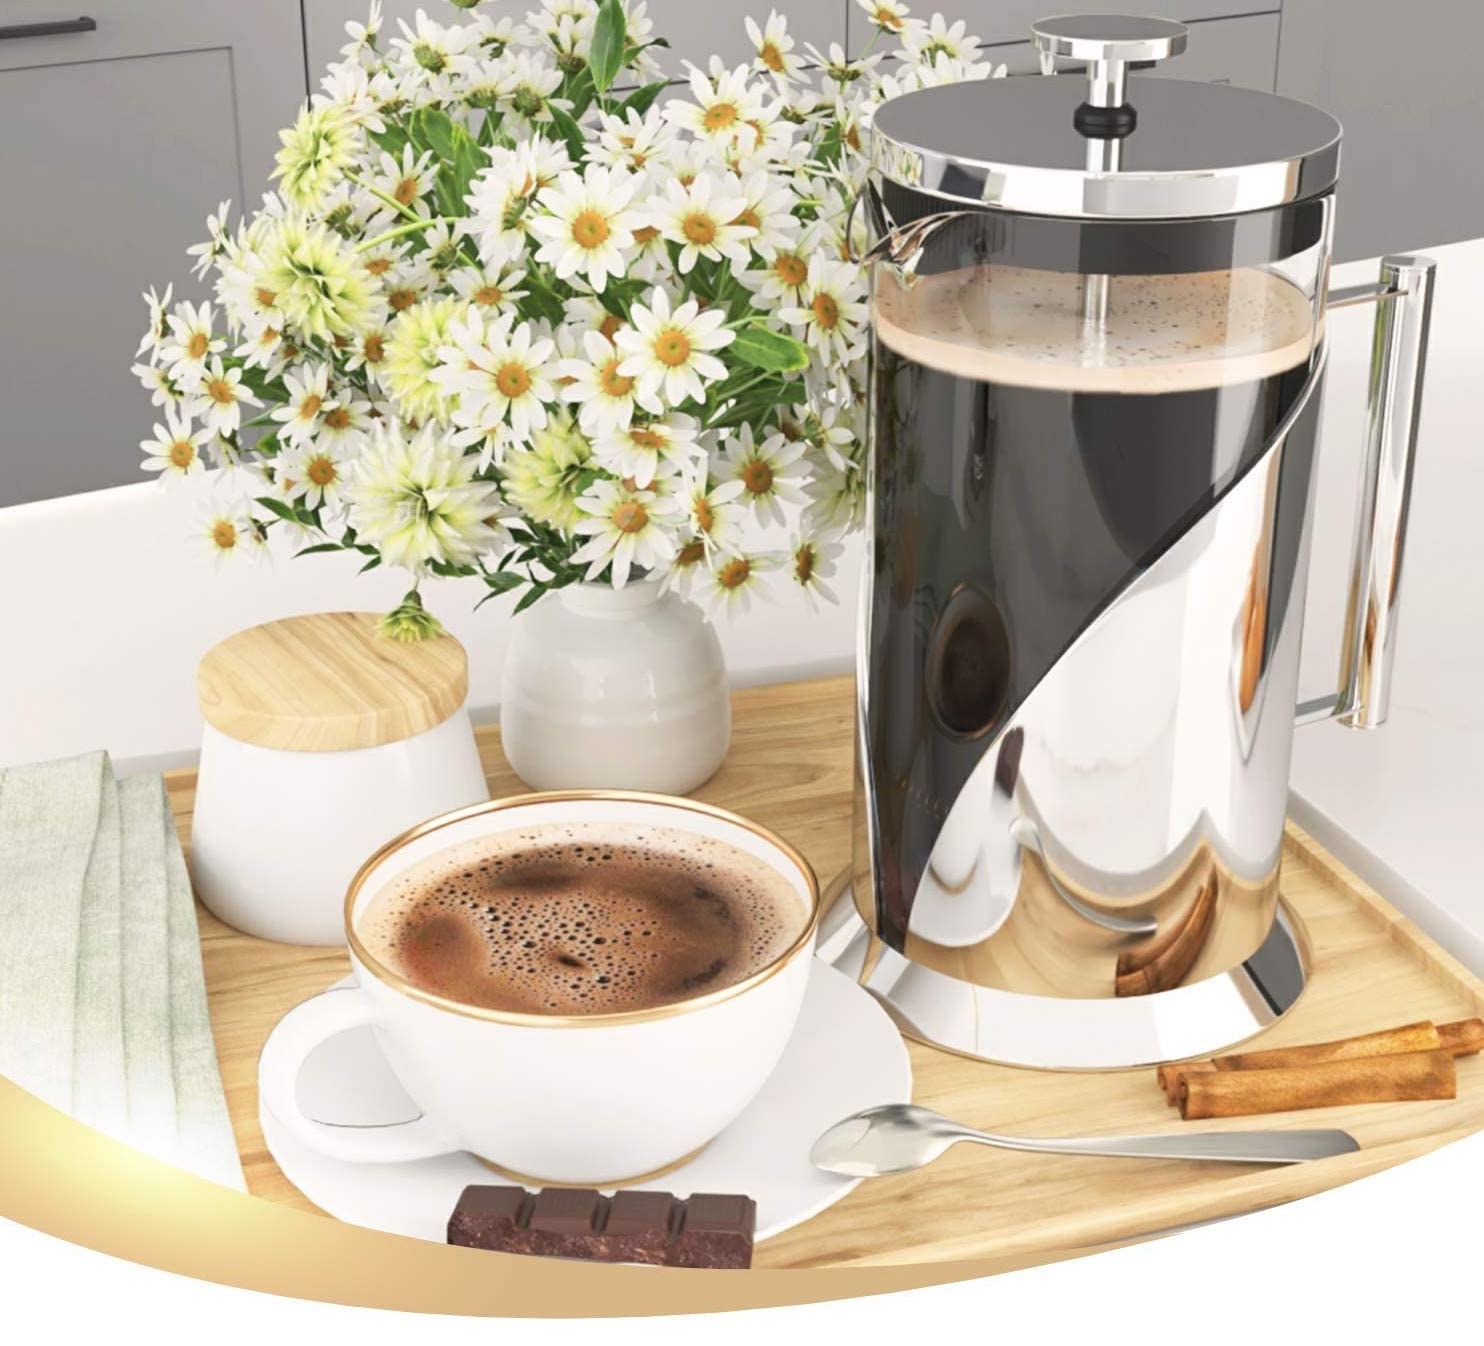 The french press on a tray with flowers and a cup of coffee